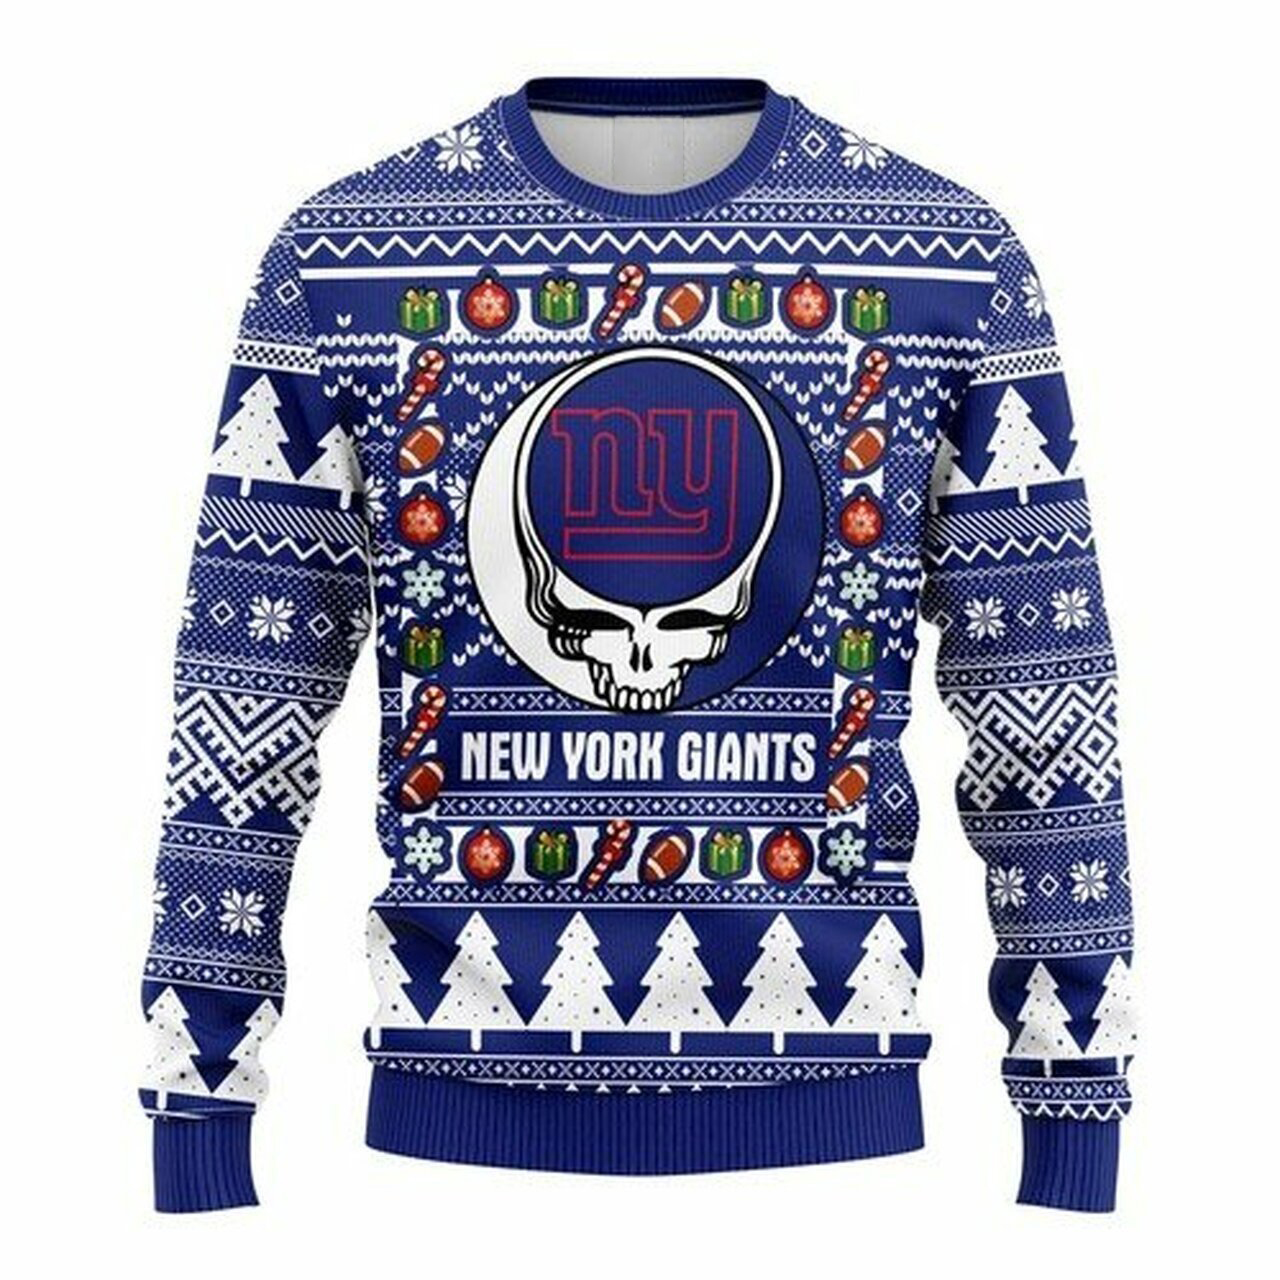 NFL New York Giants Grateful Dead ugly christmas sweater